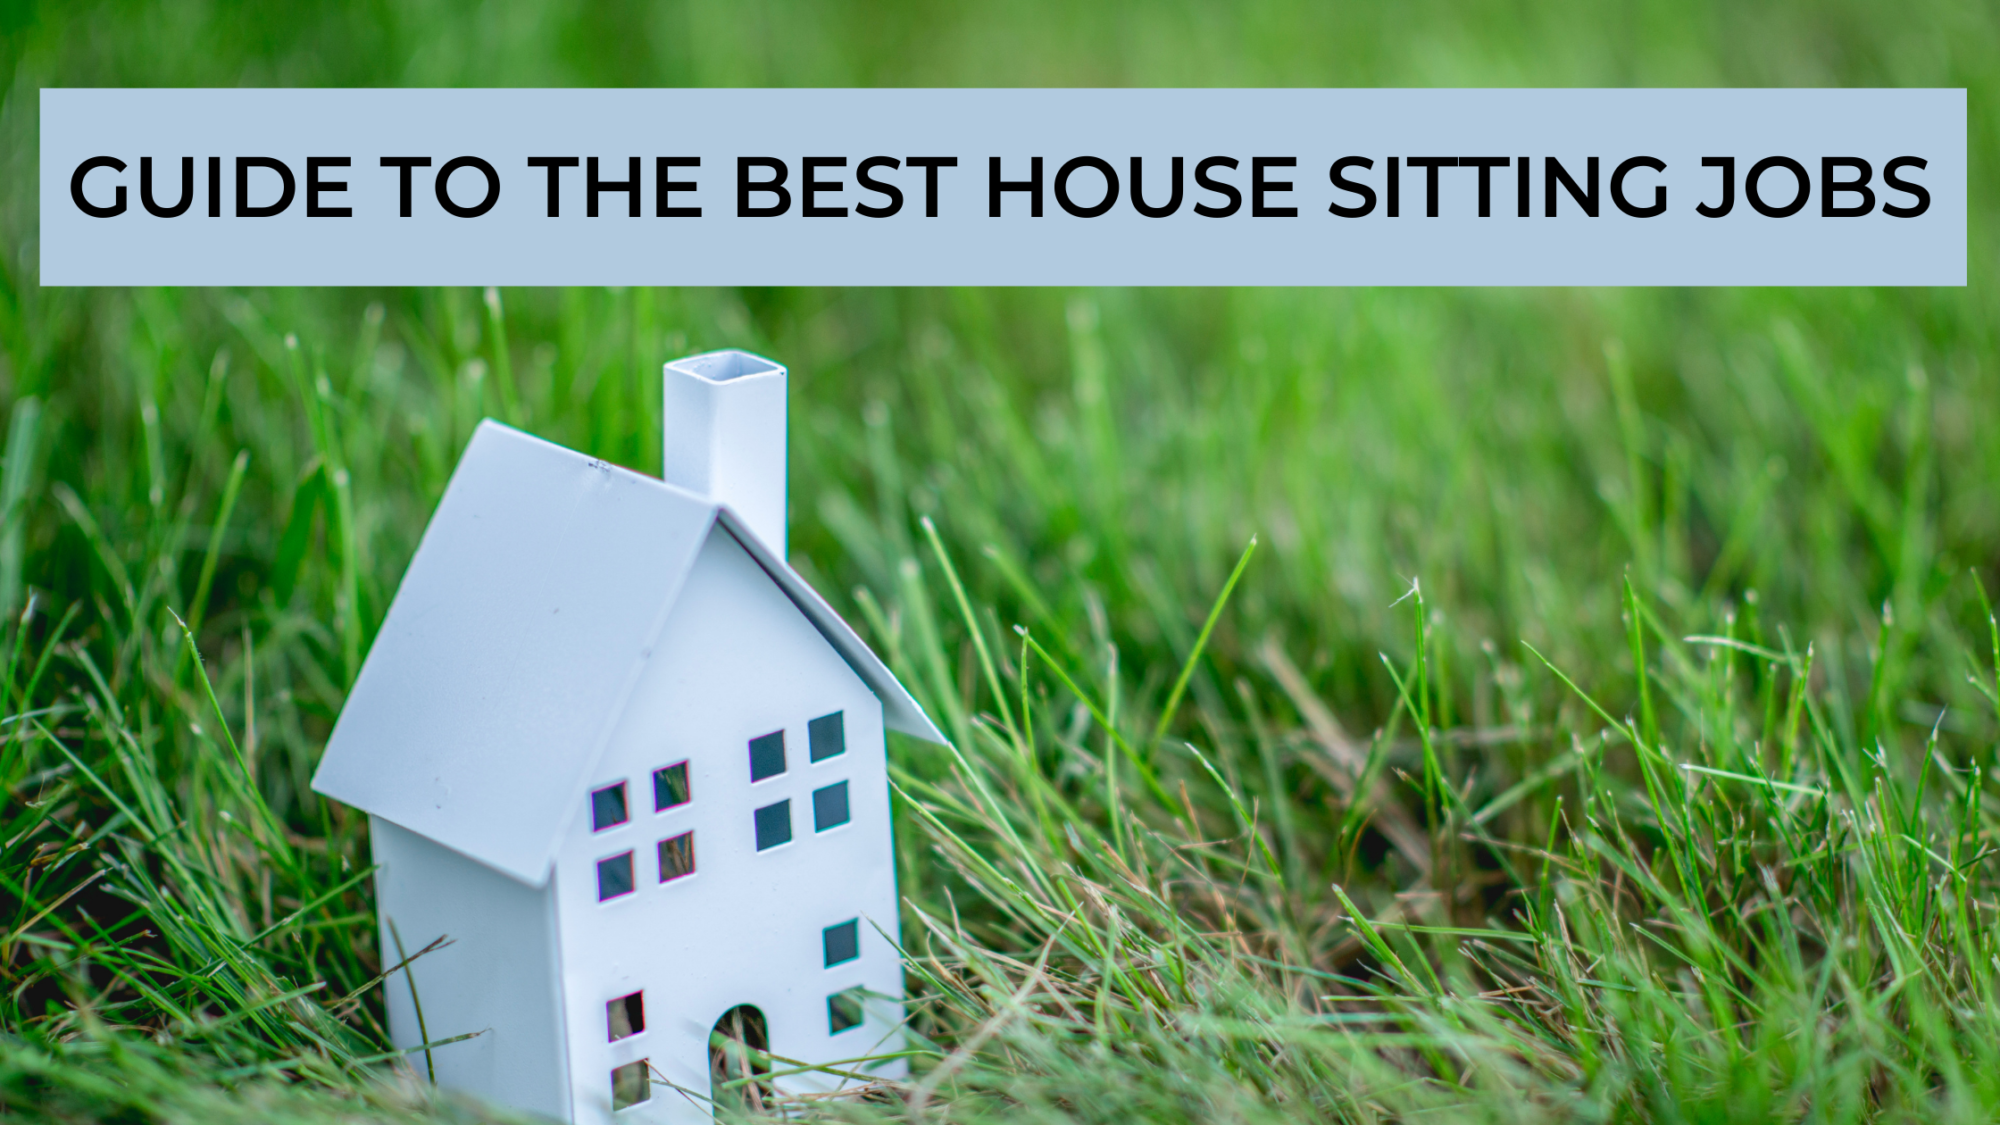 Guide to the Best House Sitting Jobs